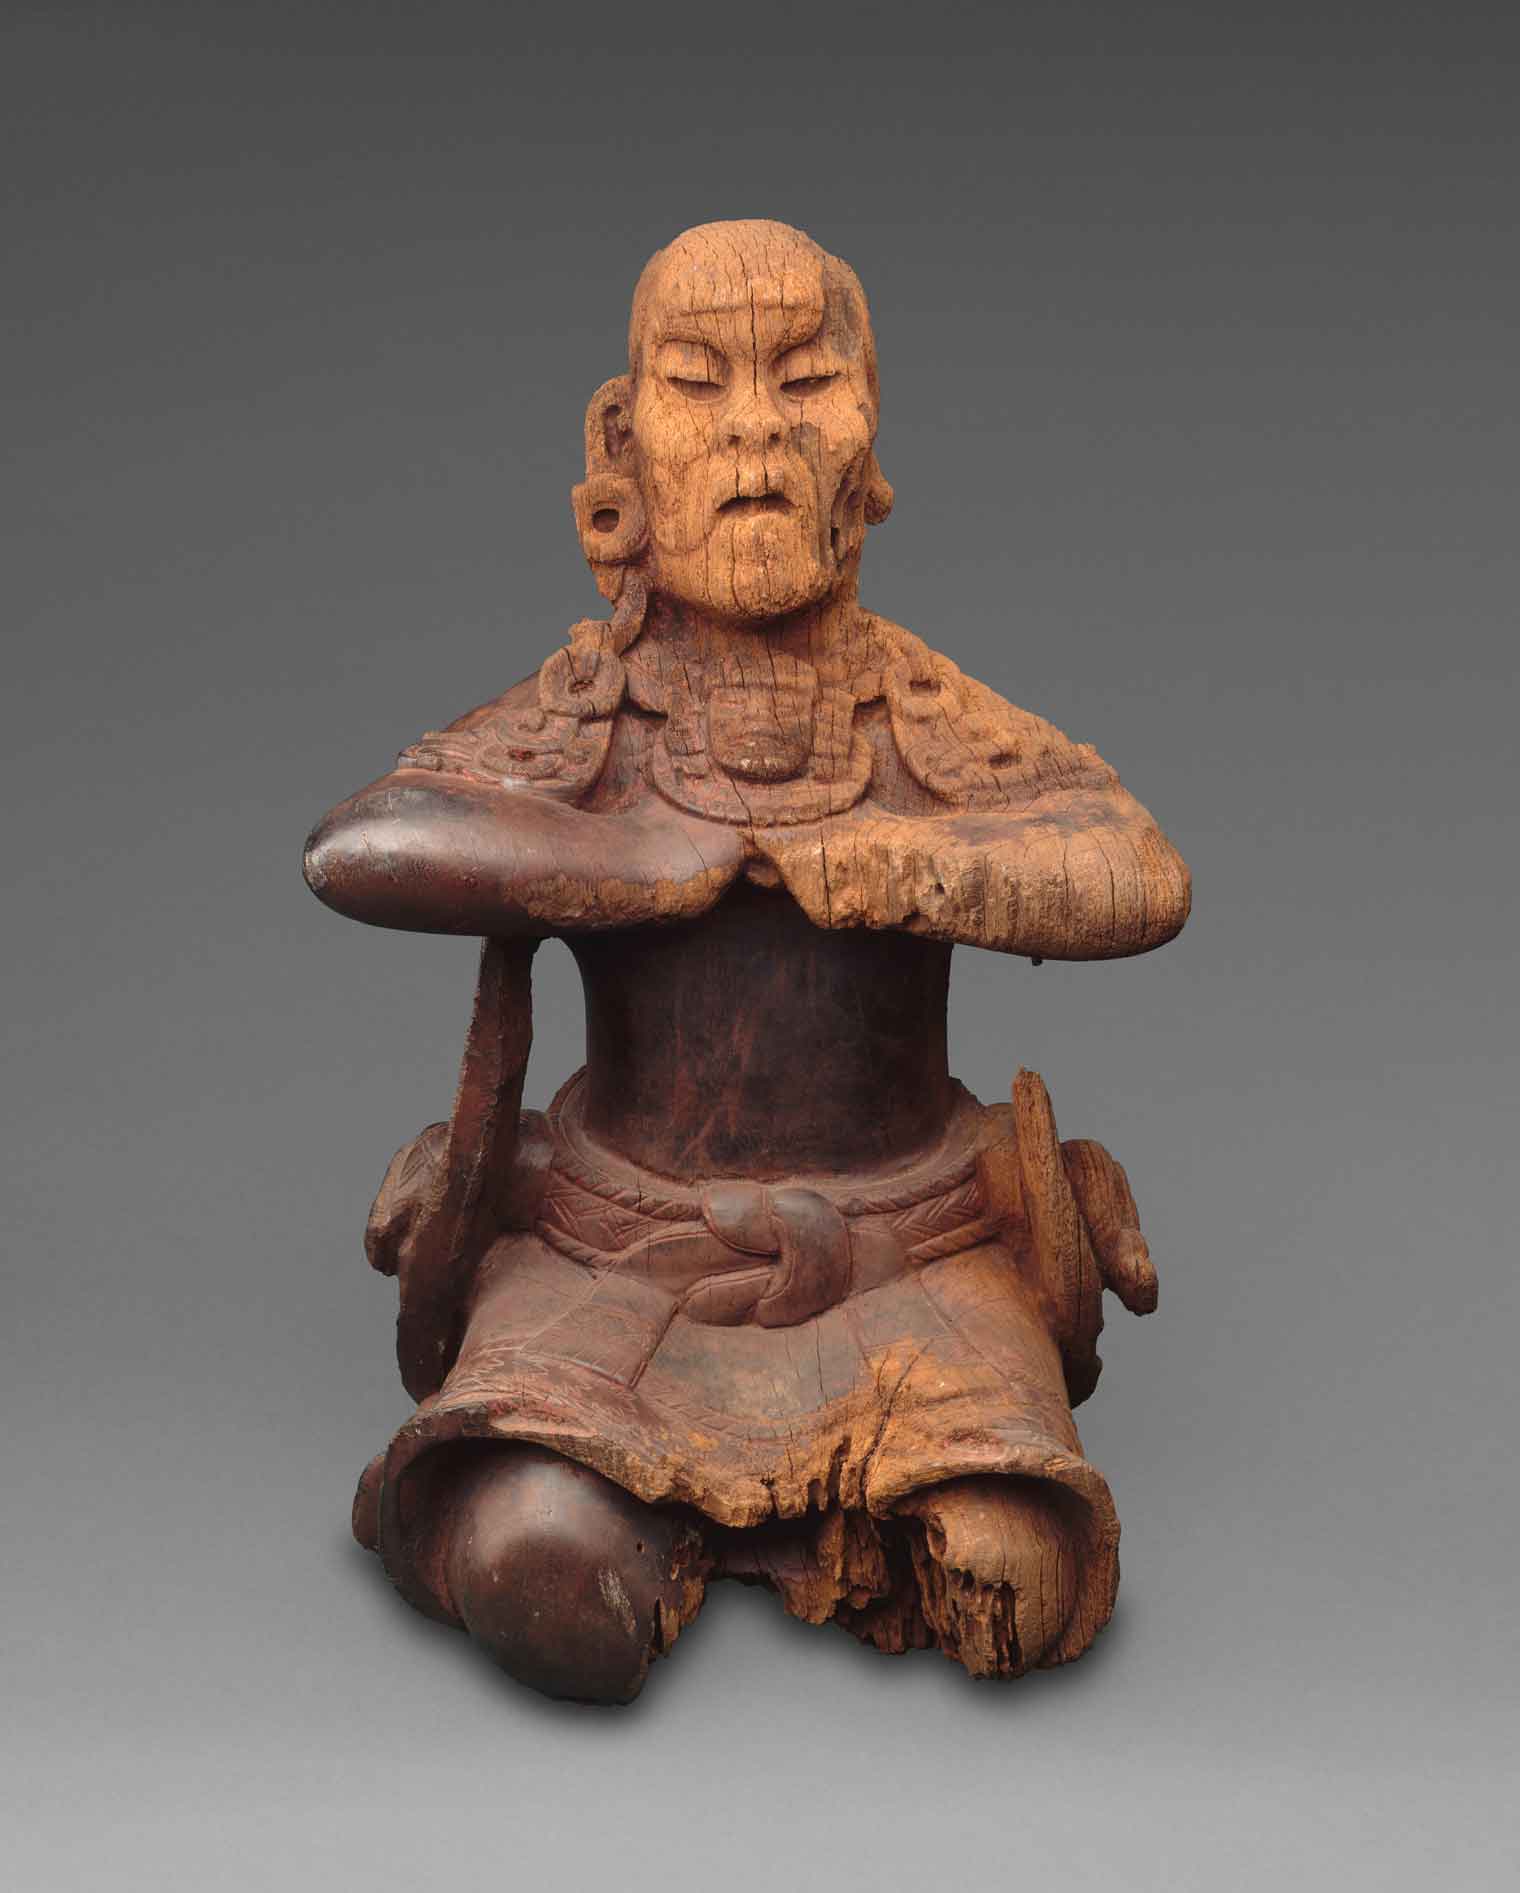 A wooden figure seated upright, with arms parallel to the ground.